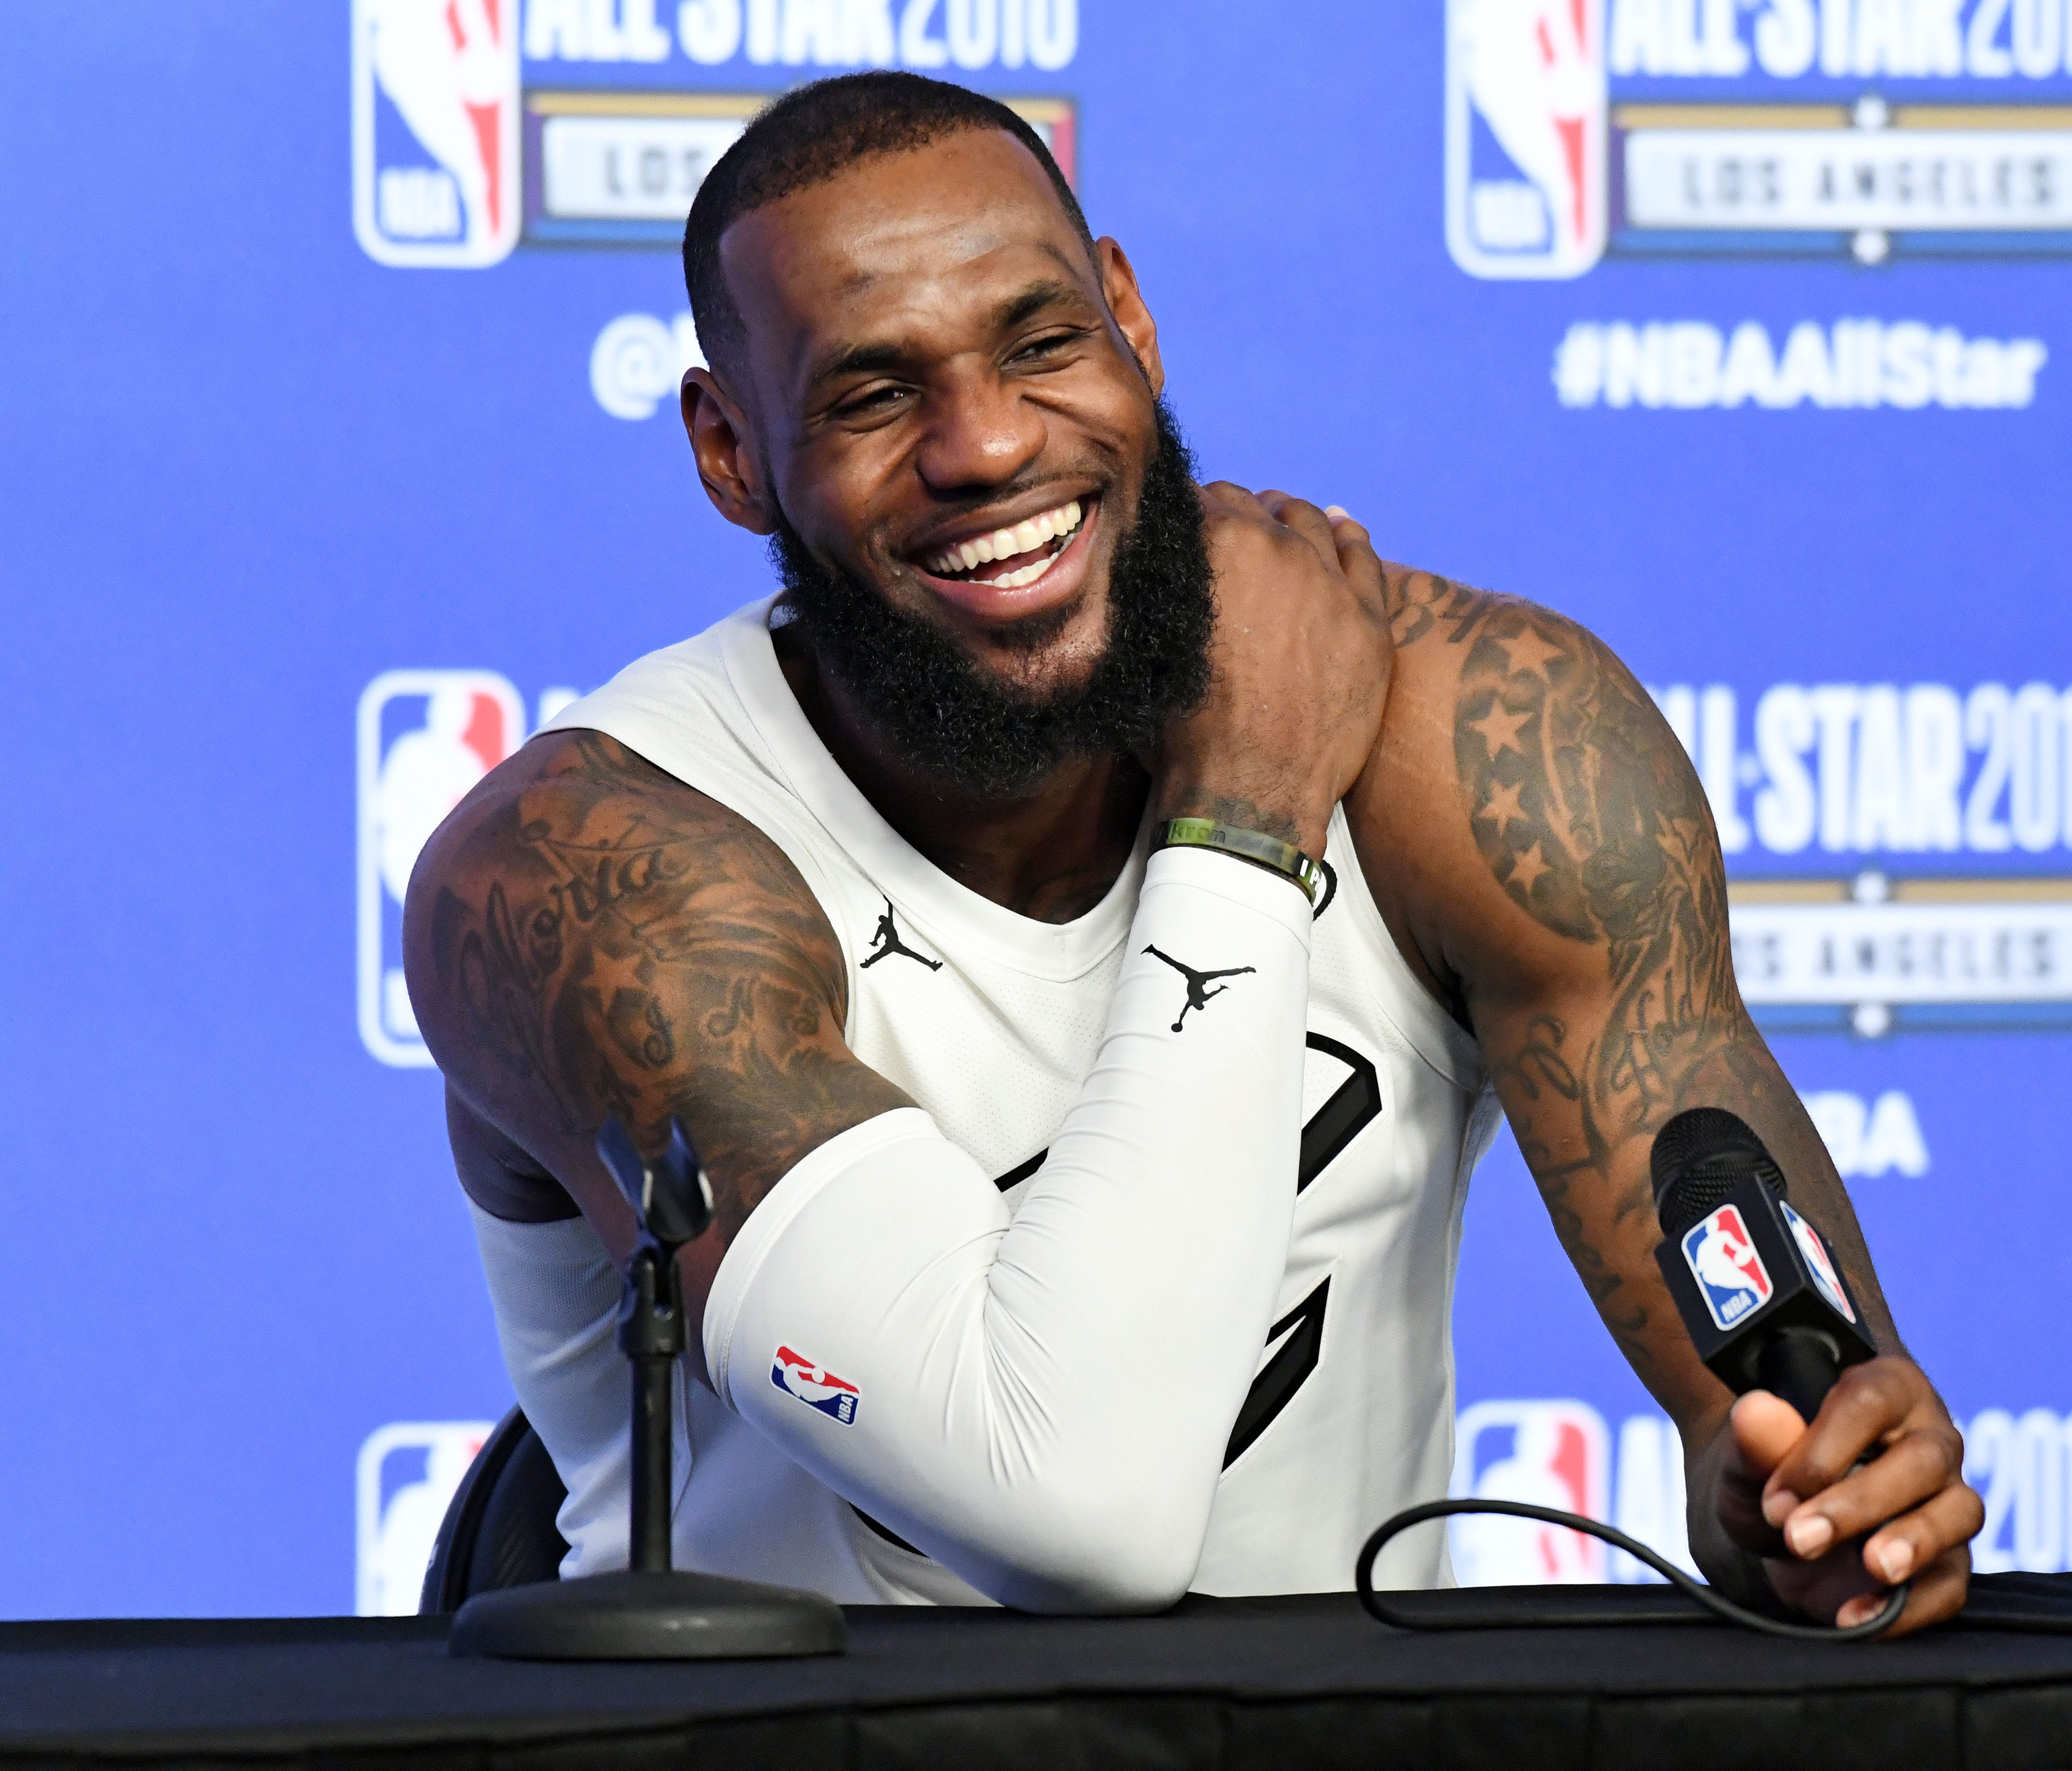 LeBron James will wear No. 23 with the Lakers, but you can't get his jersey quite yet.